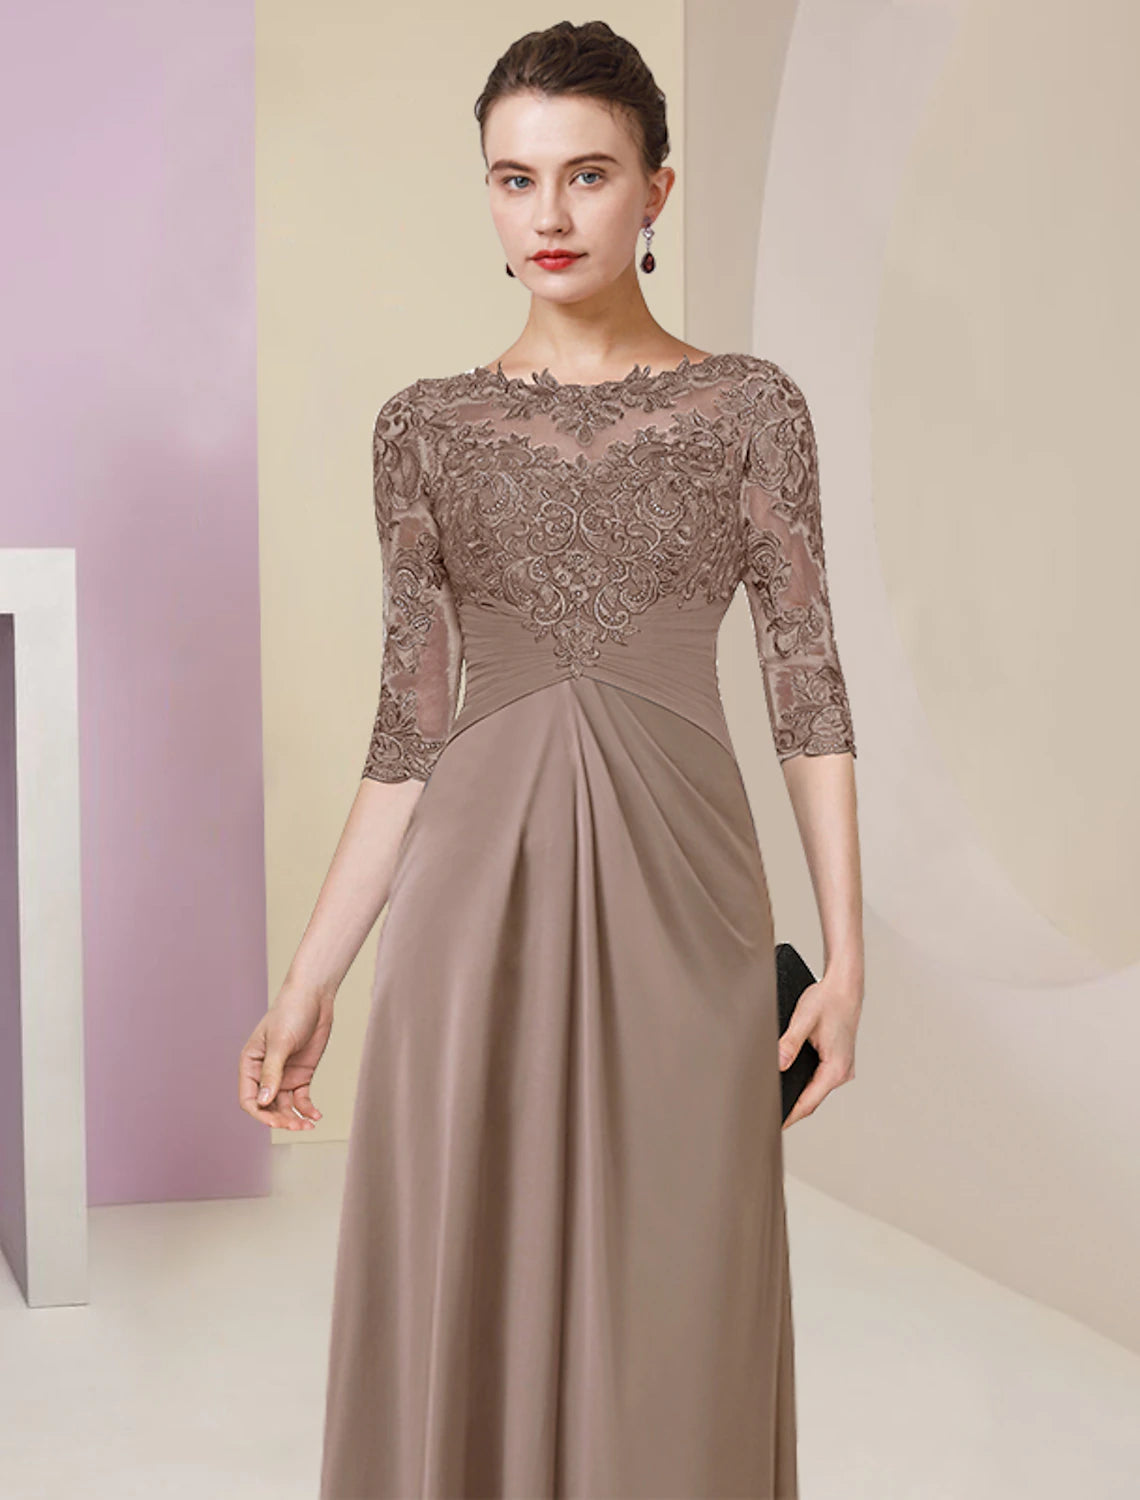 Sheath / Column Mother of the Bride Dress Simple Elegant Jewel Neck Floor Length Chiffon Lace Half Sleeve with Pleats Solid Color